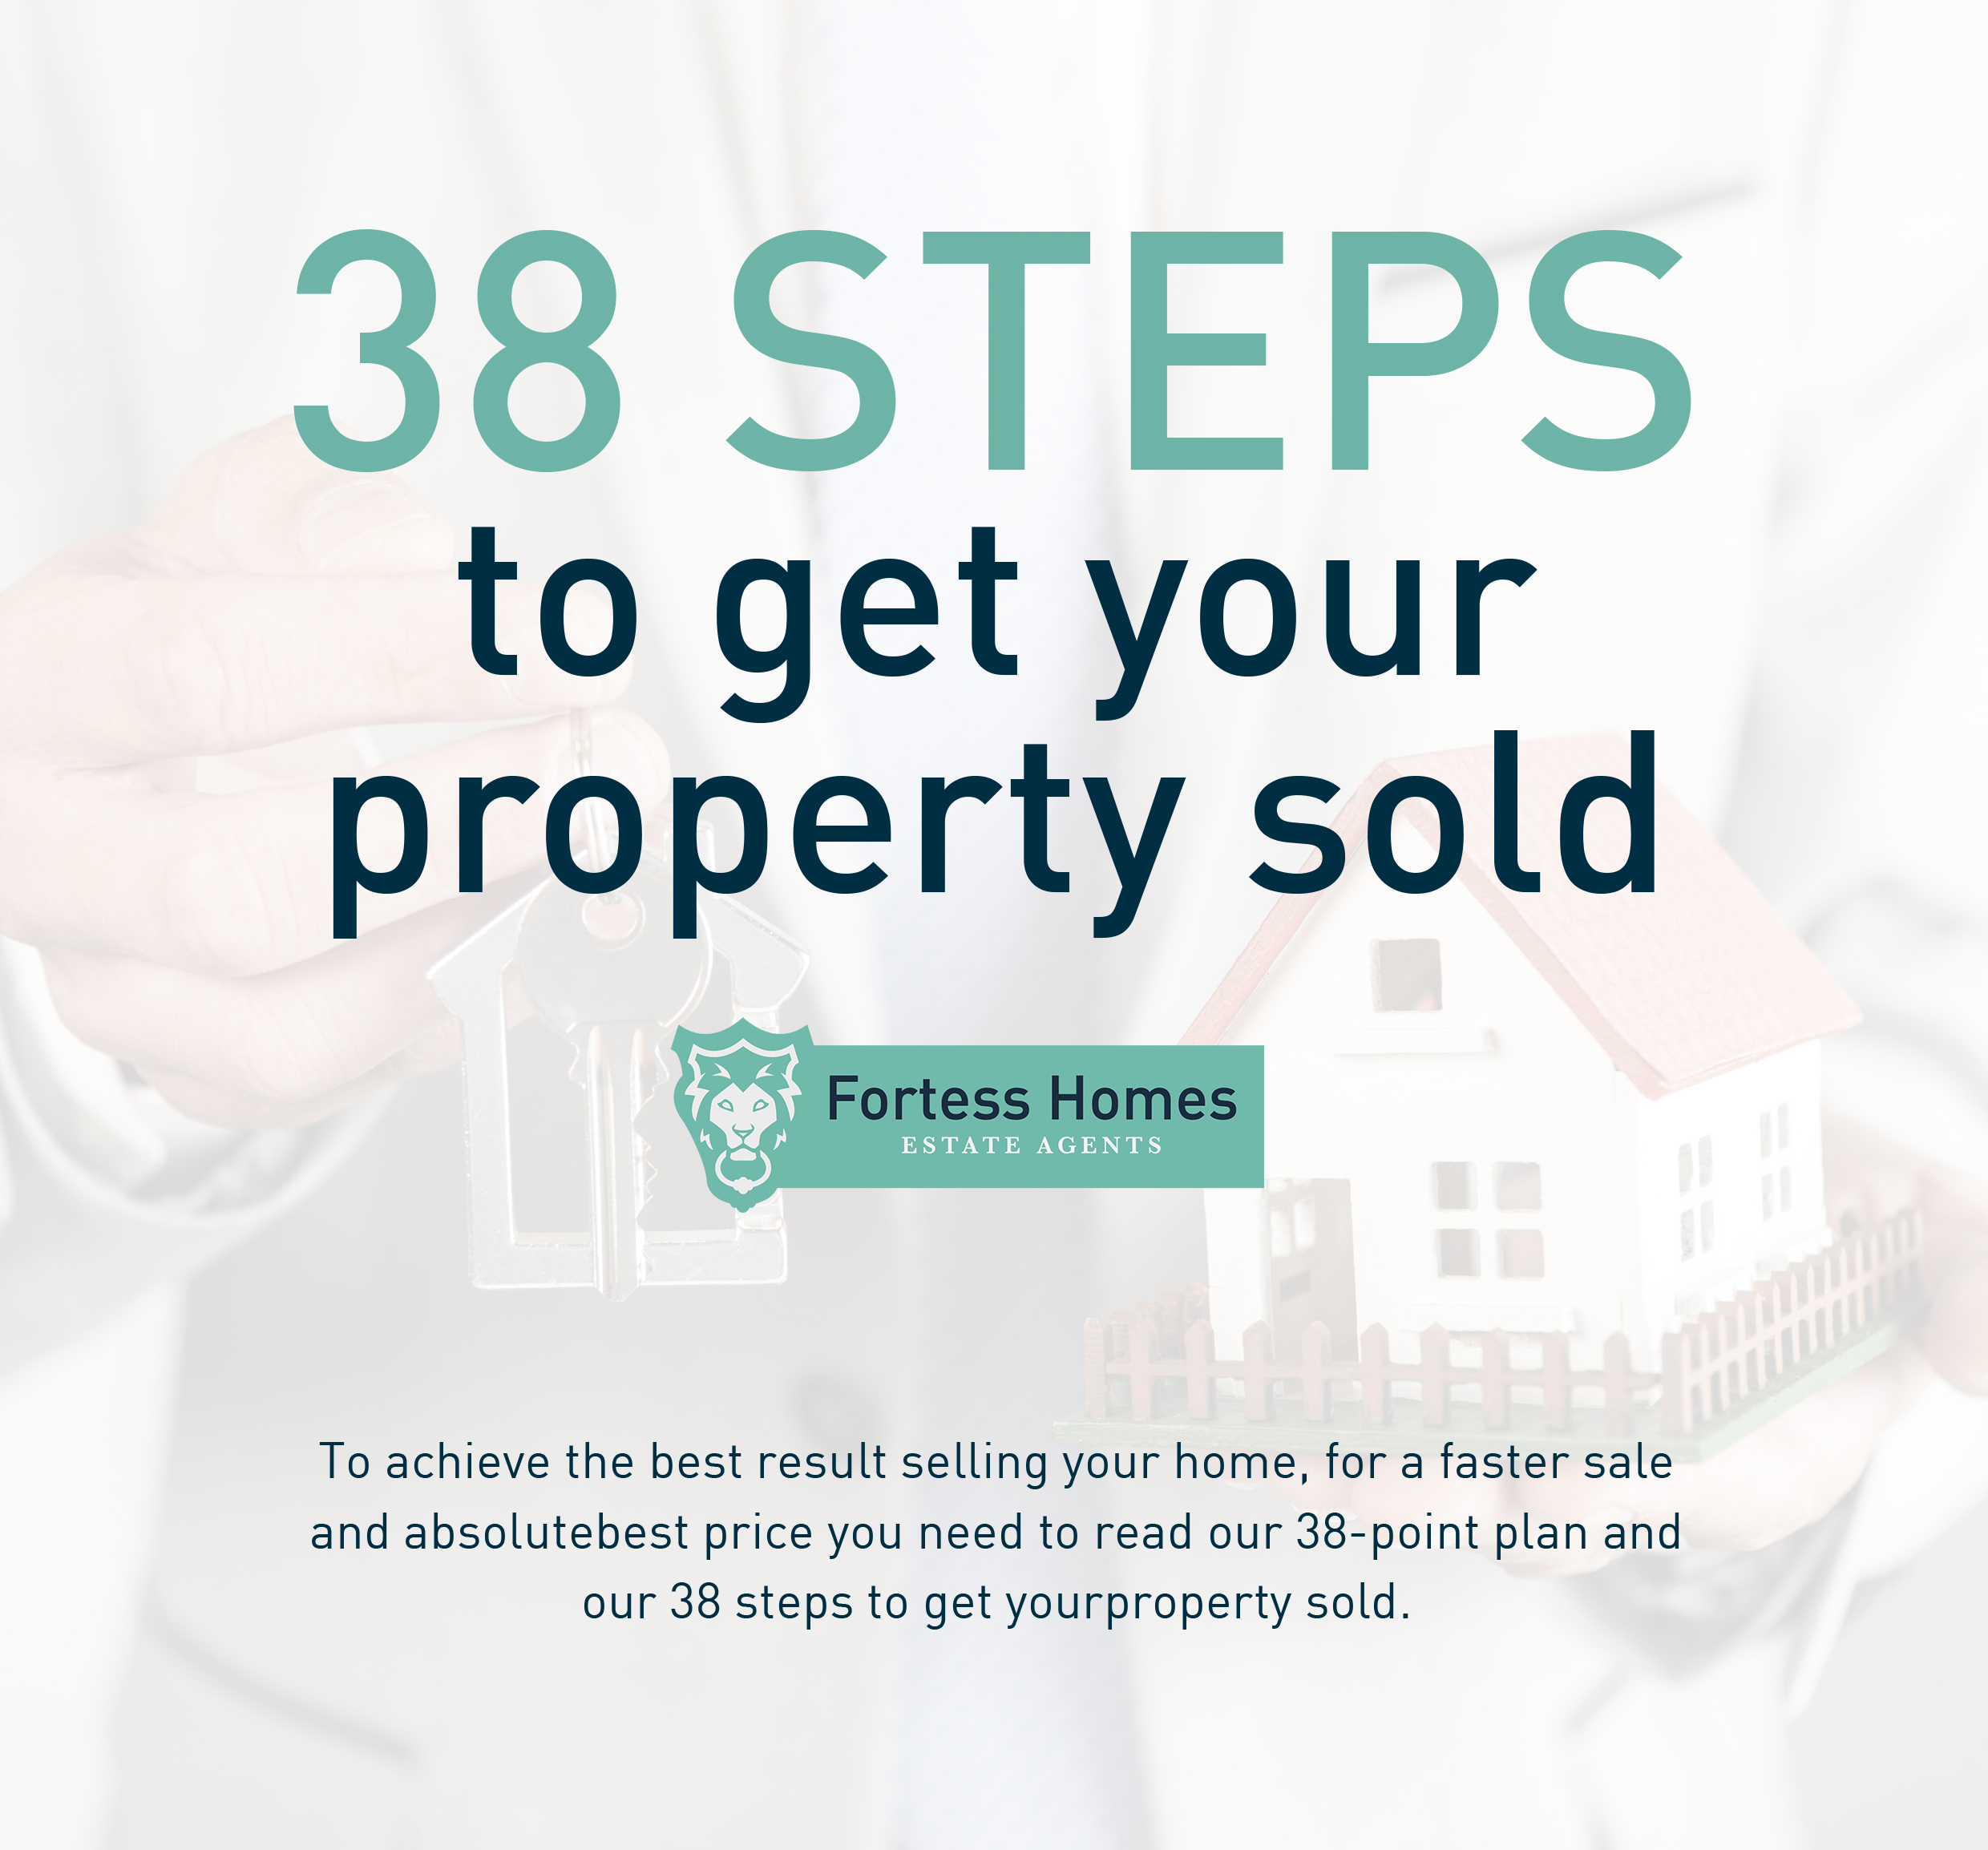 38 steps to get your property sold